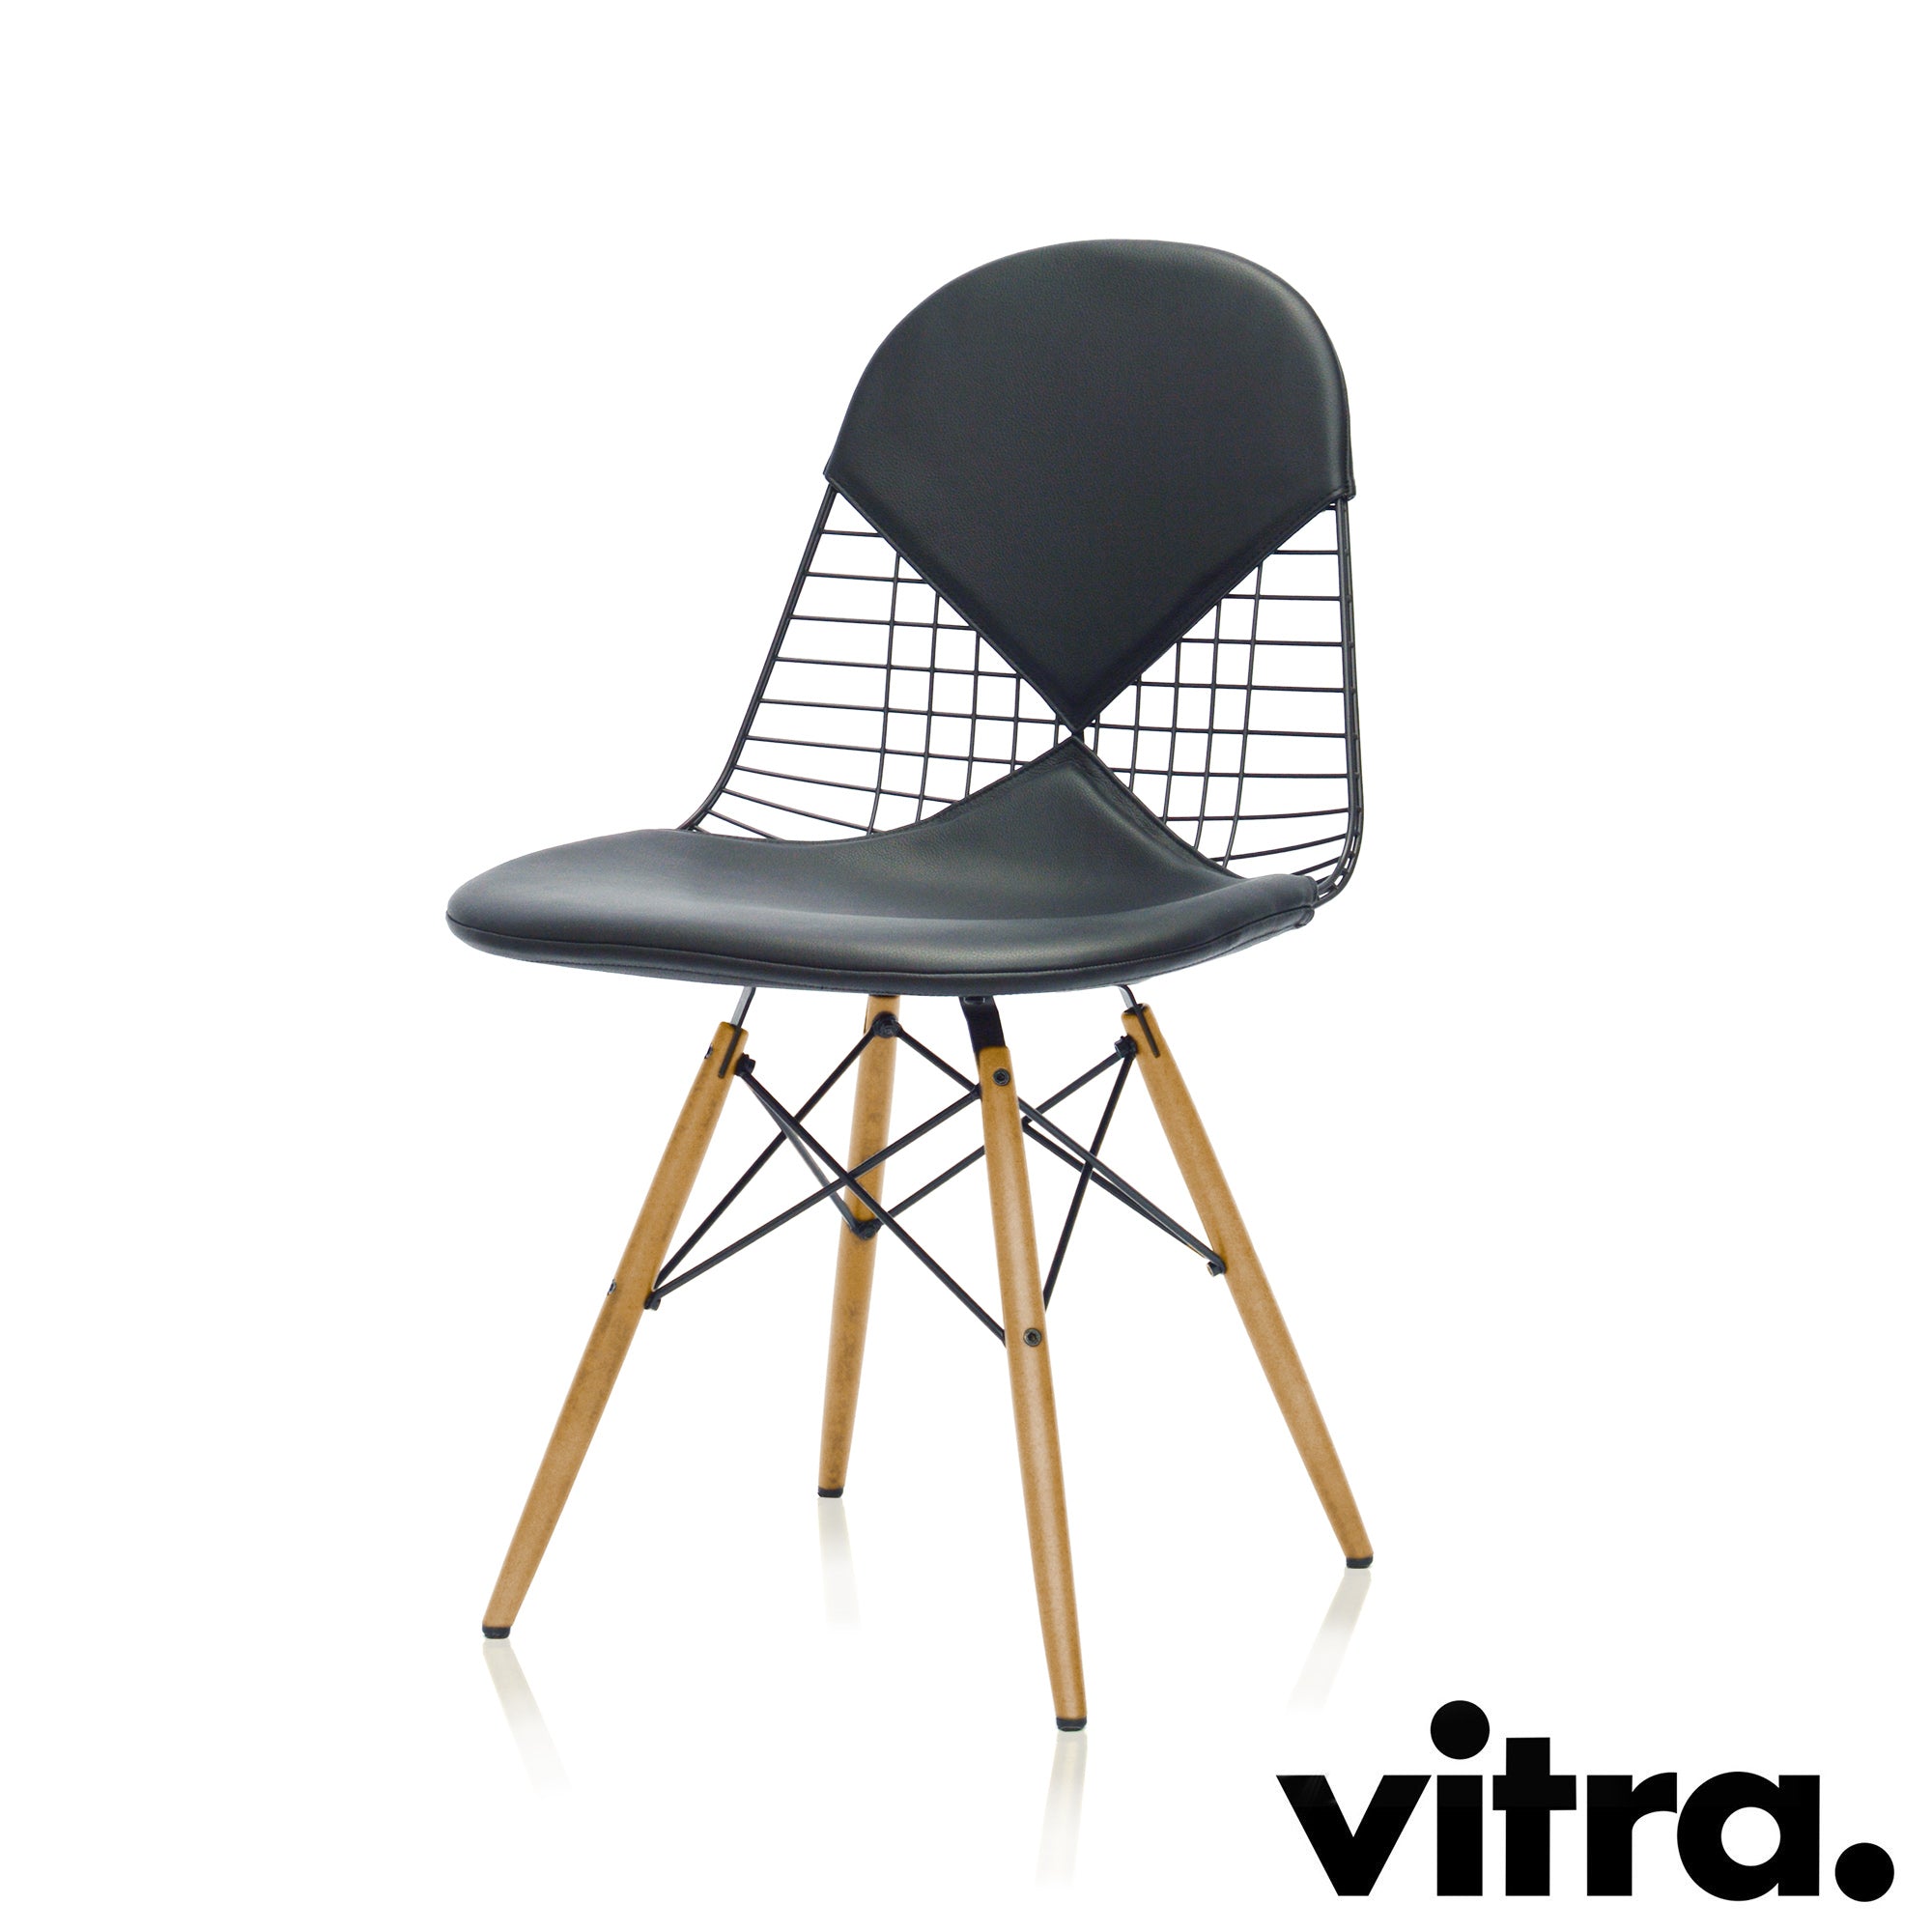 DKR-2 Wire Chair Seat and Back Cushion Vitra